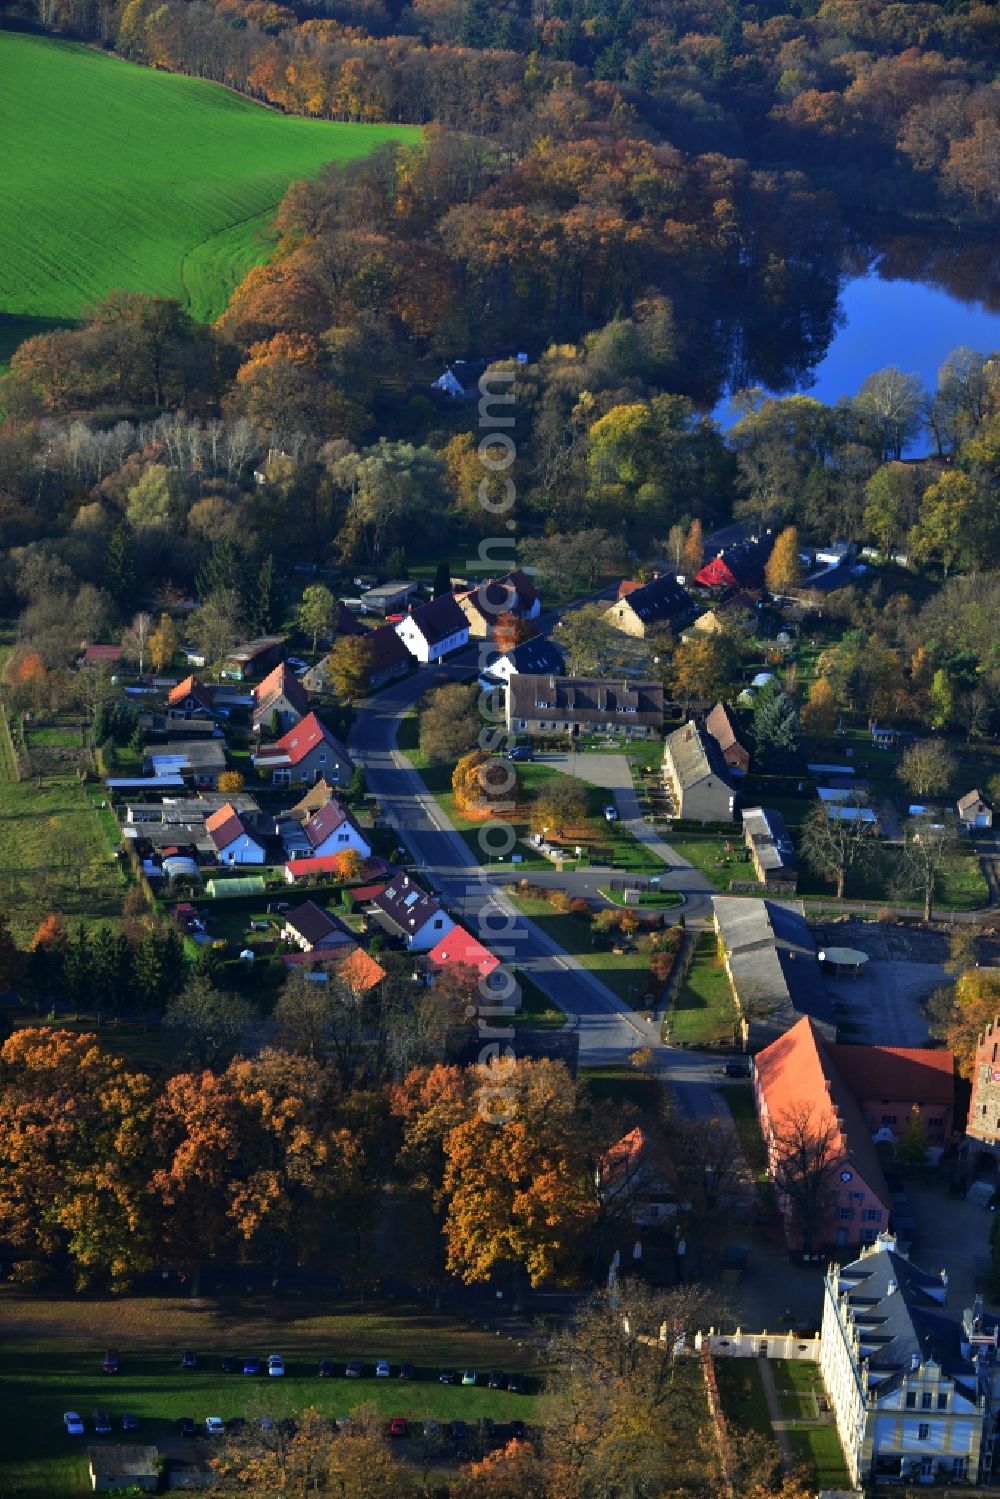 Löwenberger Land Liebenberg from the bird's eye view: Small village at the Weissen See along the Bergsdorfer Strasse. Single-family and multi-family houses with gardens surrounded by forest and field areas in the district Liebenberg in Loewenberger Land in the state of Brandenburg